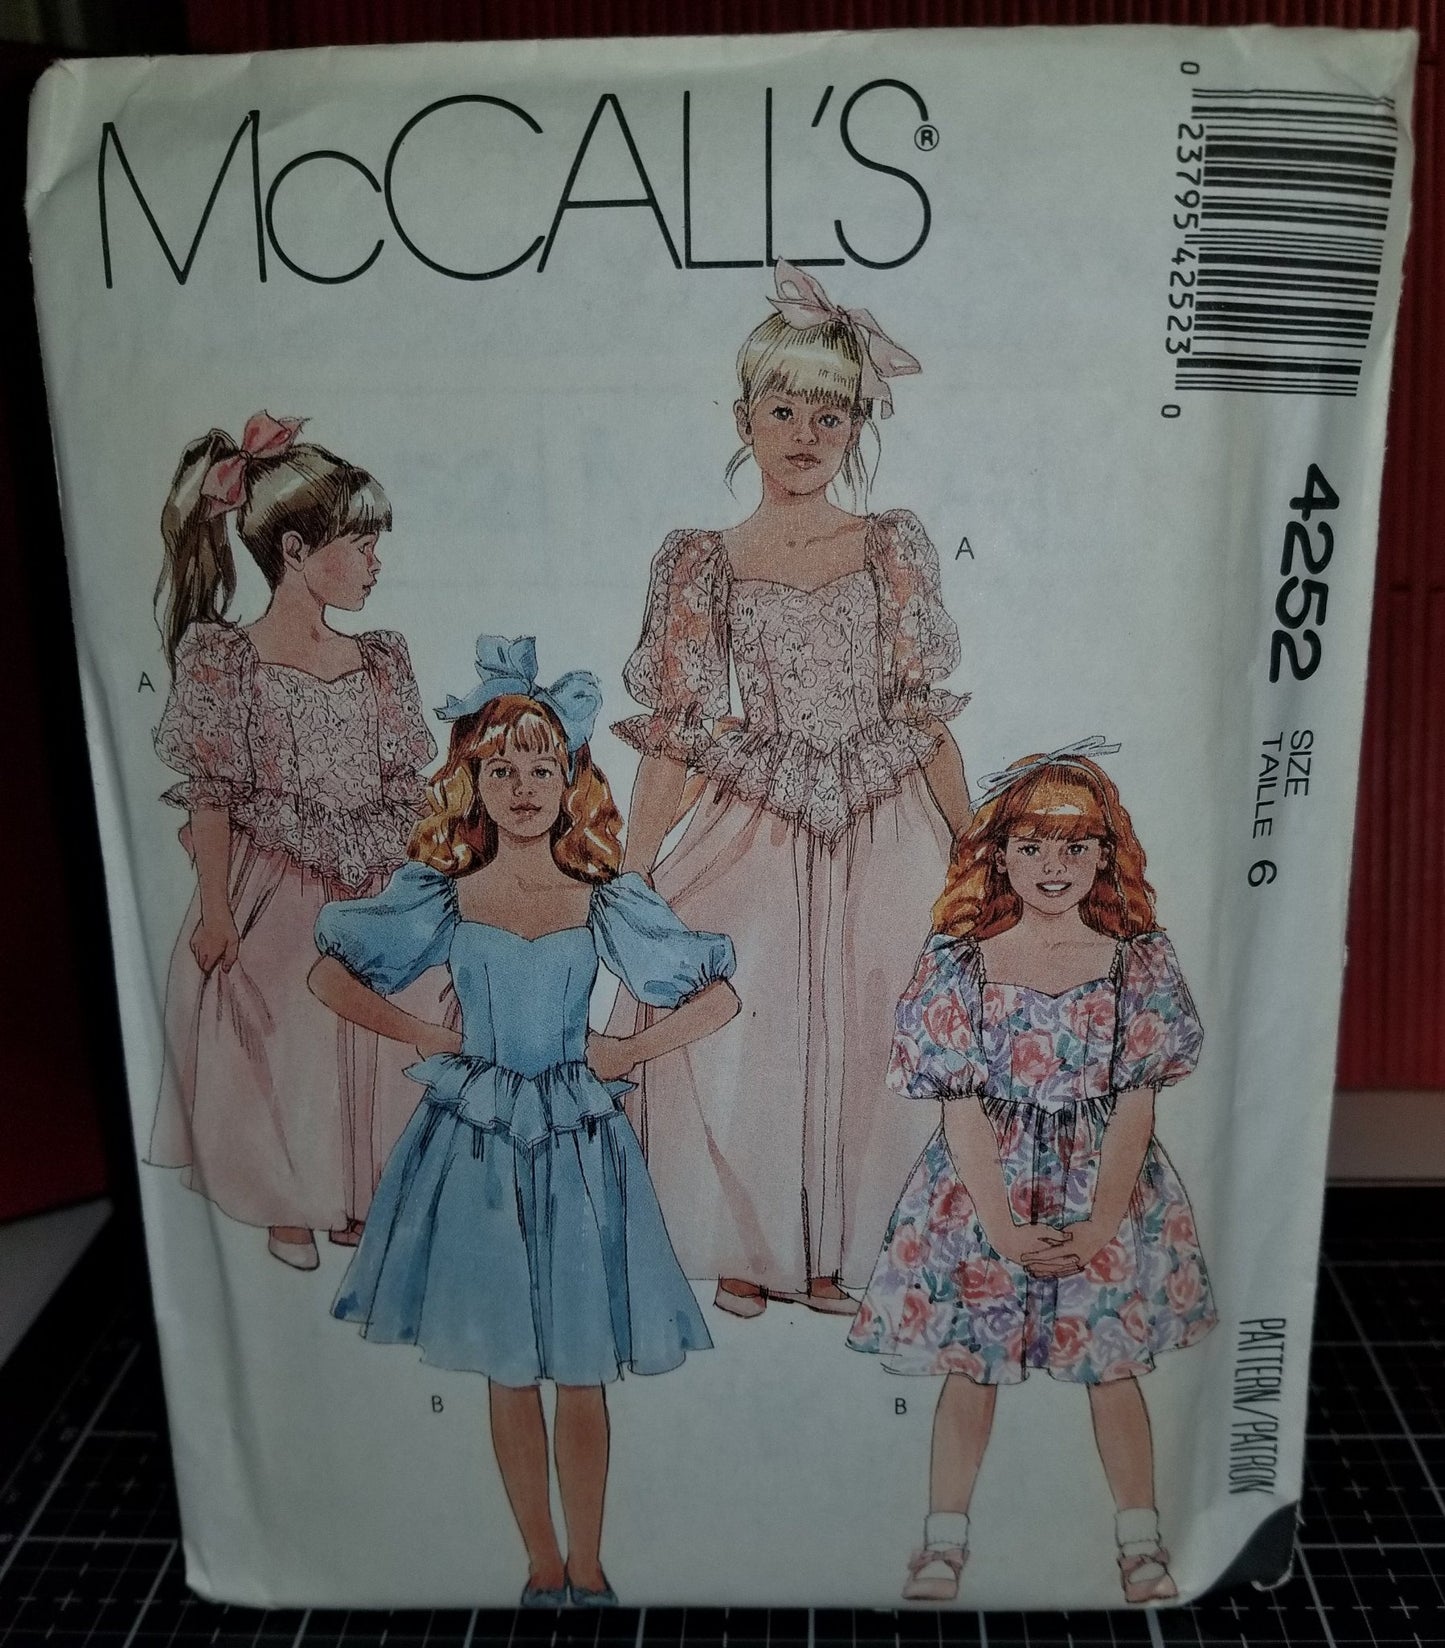 McCall's 4252 Pattern Vintage Children And Girl Gown Or Dress